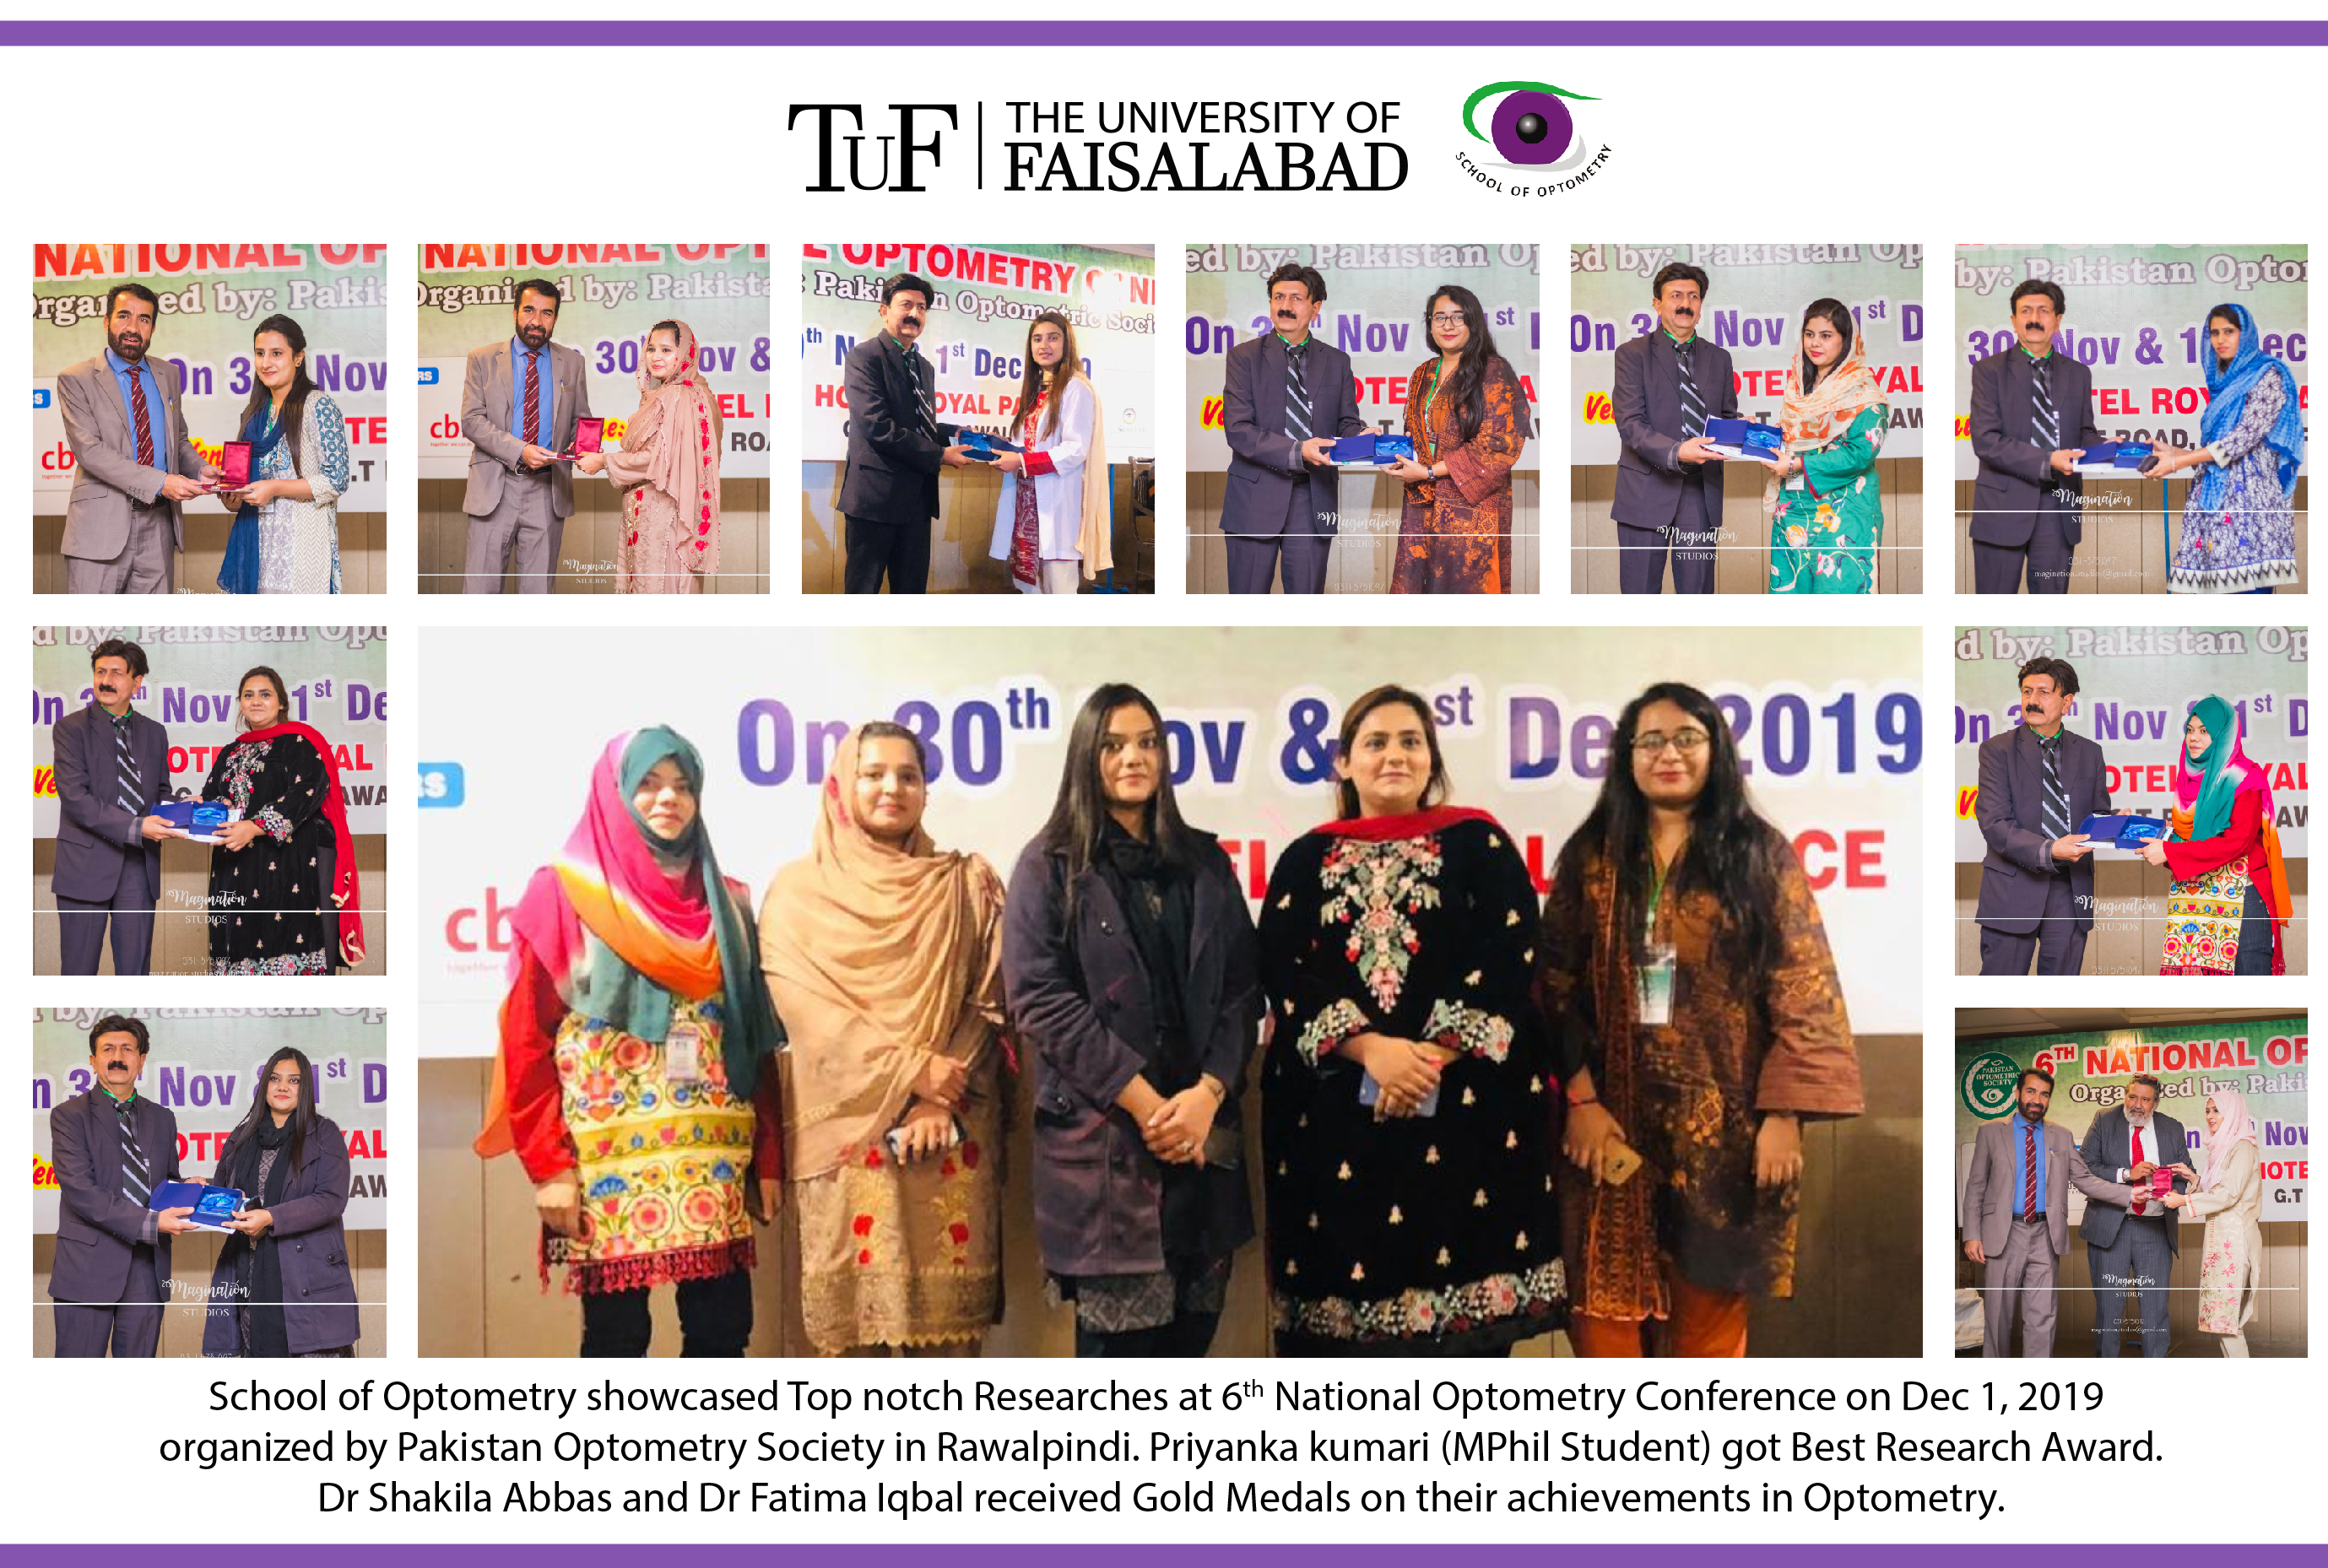 School of Optometry showcased Top Notch Researchs at 6th National Optometry Conference